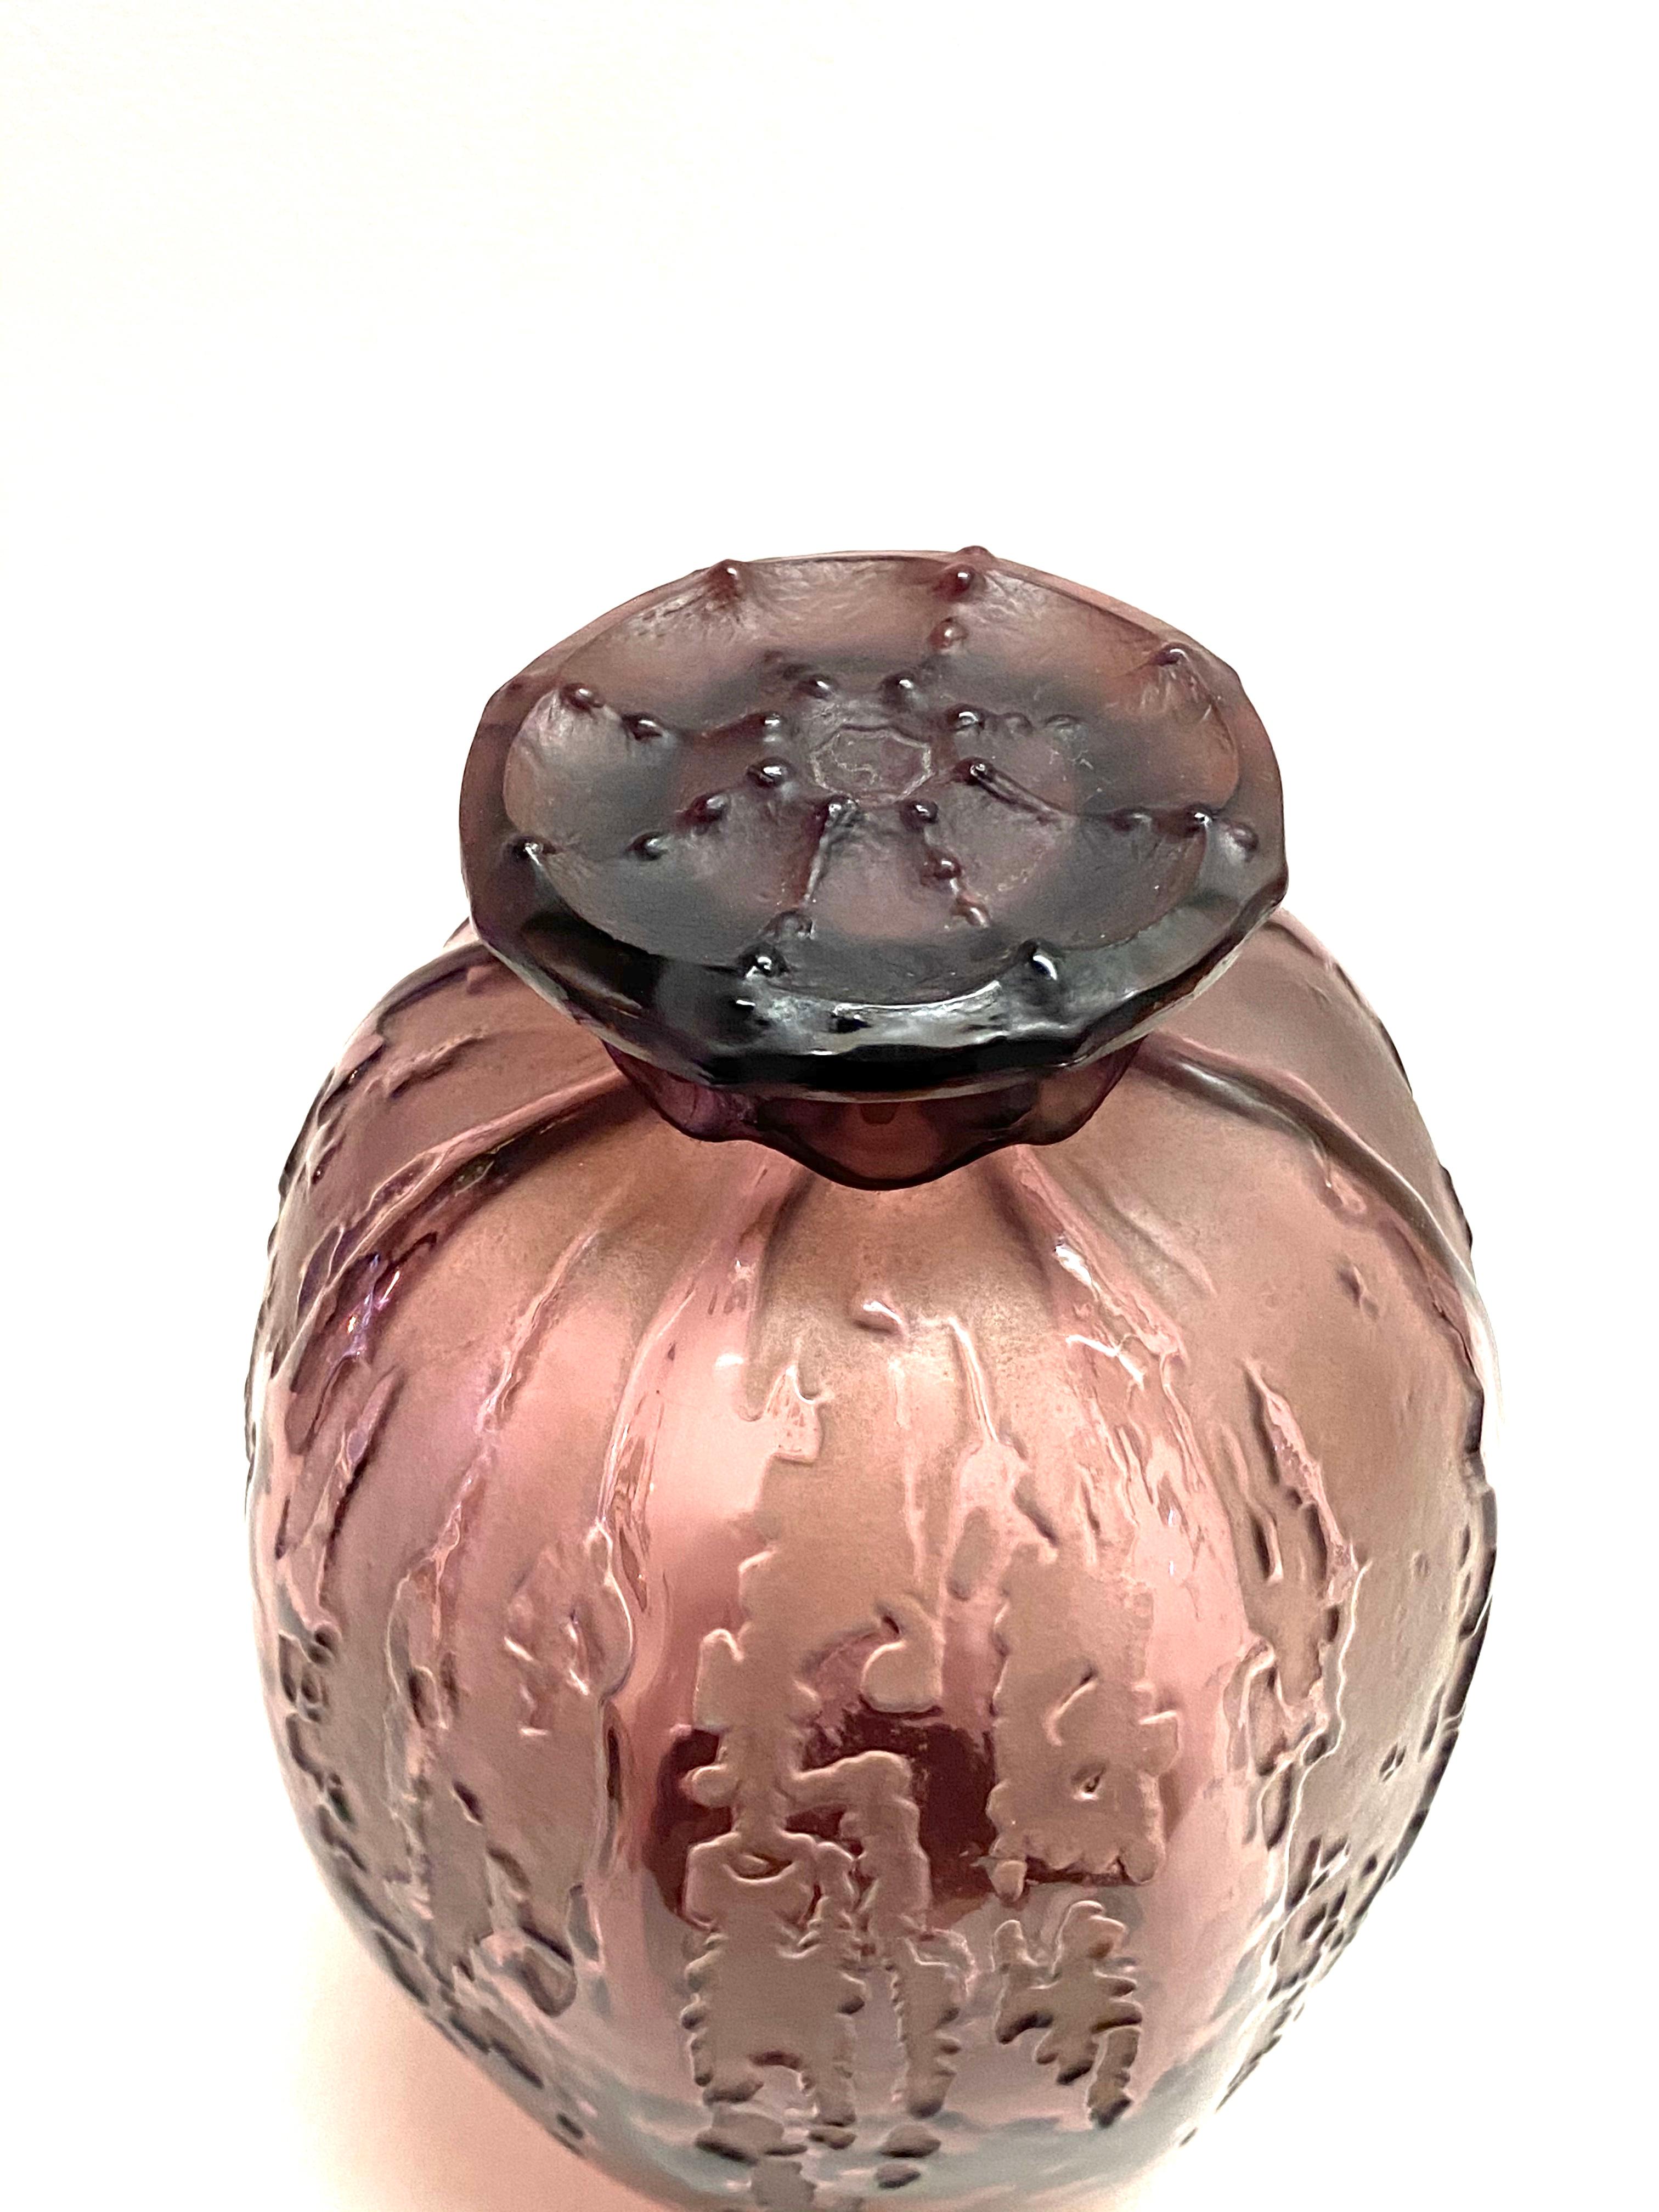 Art Deco 1912 René Lalique Fontaines Covered Vase in Amethyst Glass, Masks Stopper